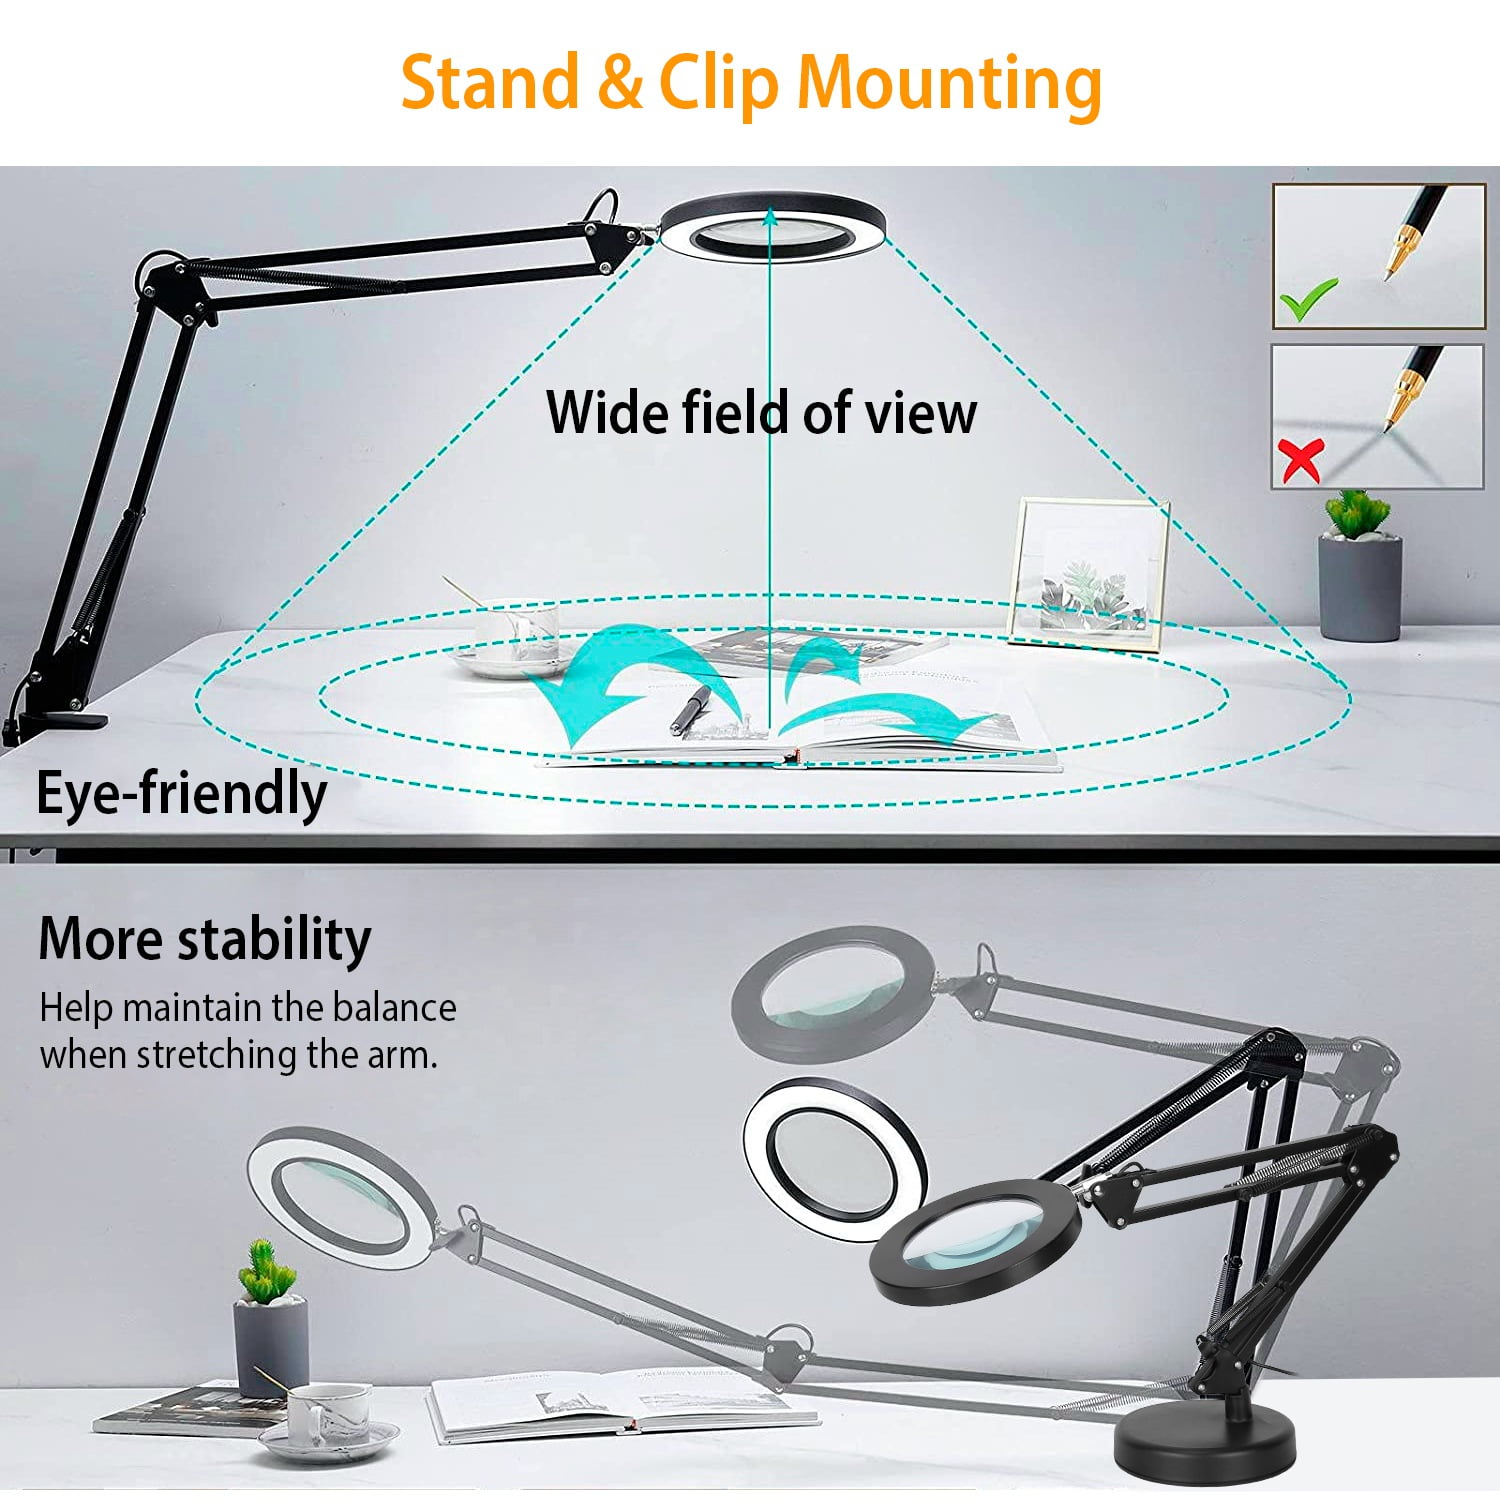 LED Magnifier Lamp 8X Magnifying Glass Desk Table Reading Lamp w/ Clamp  C6R1